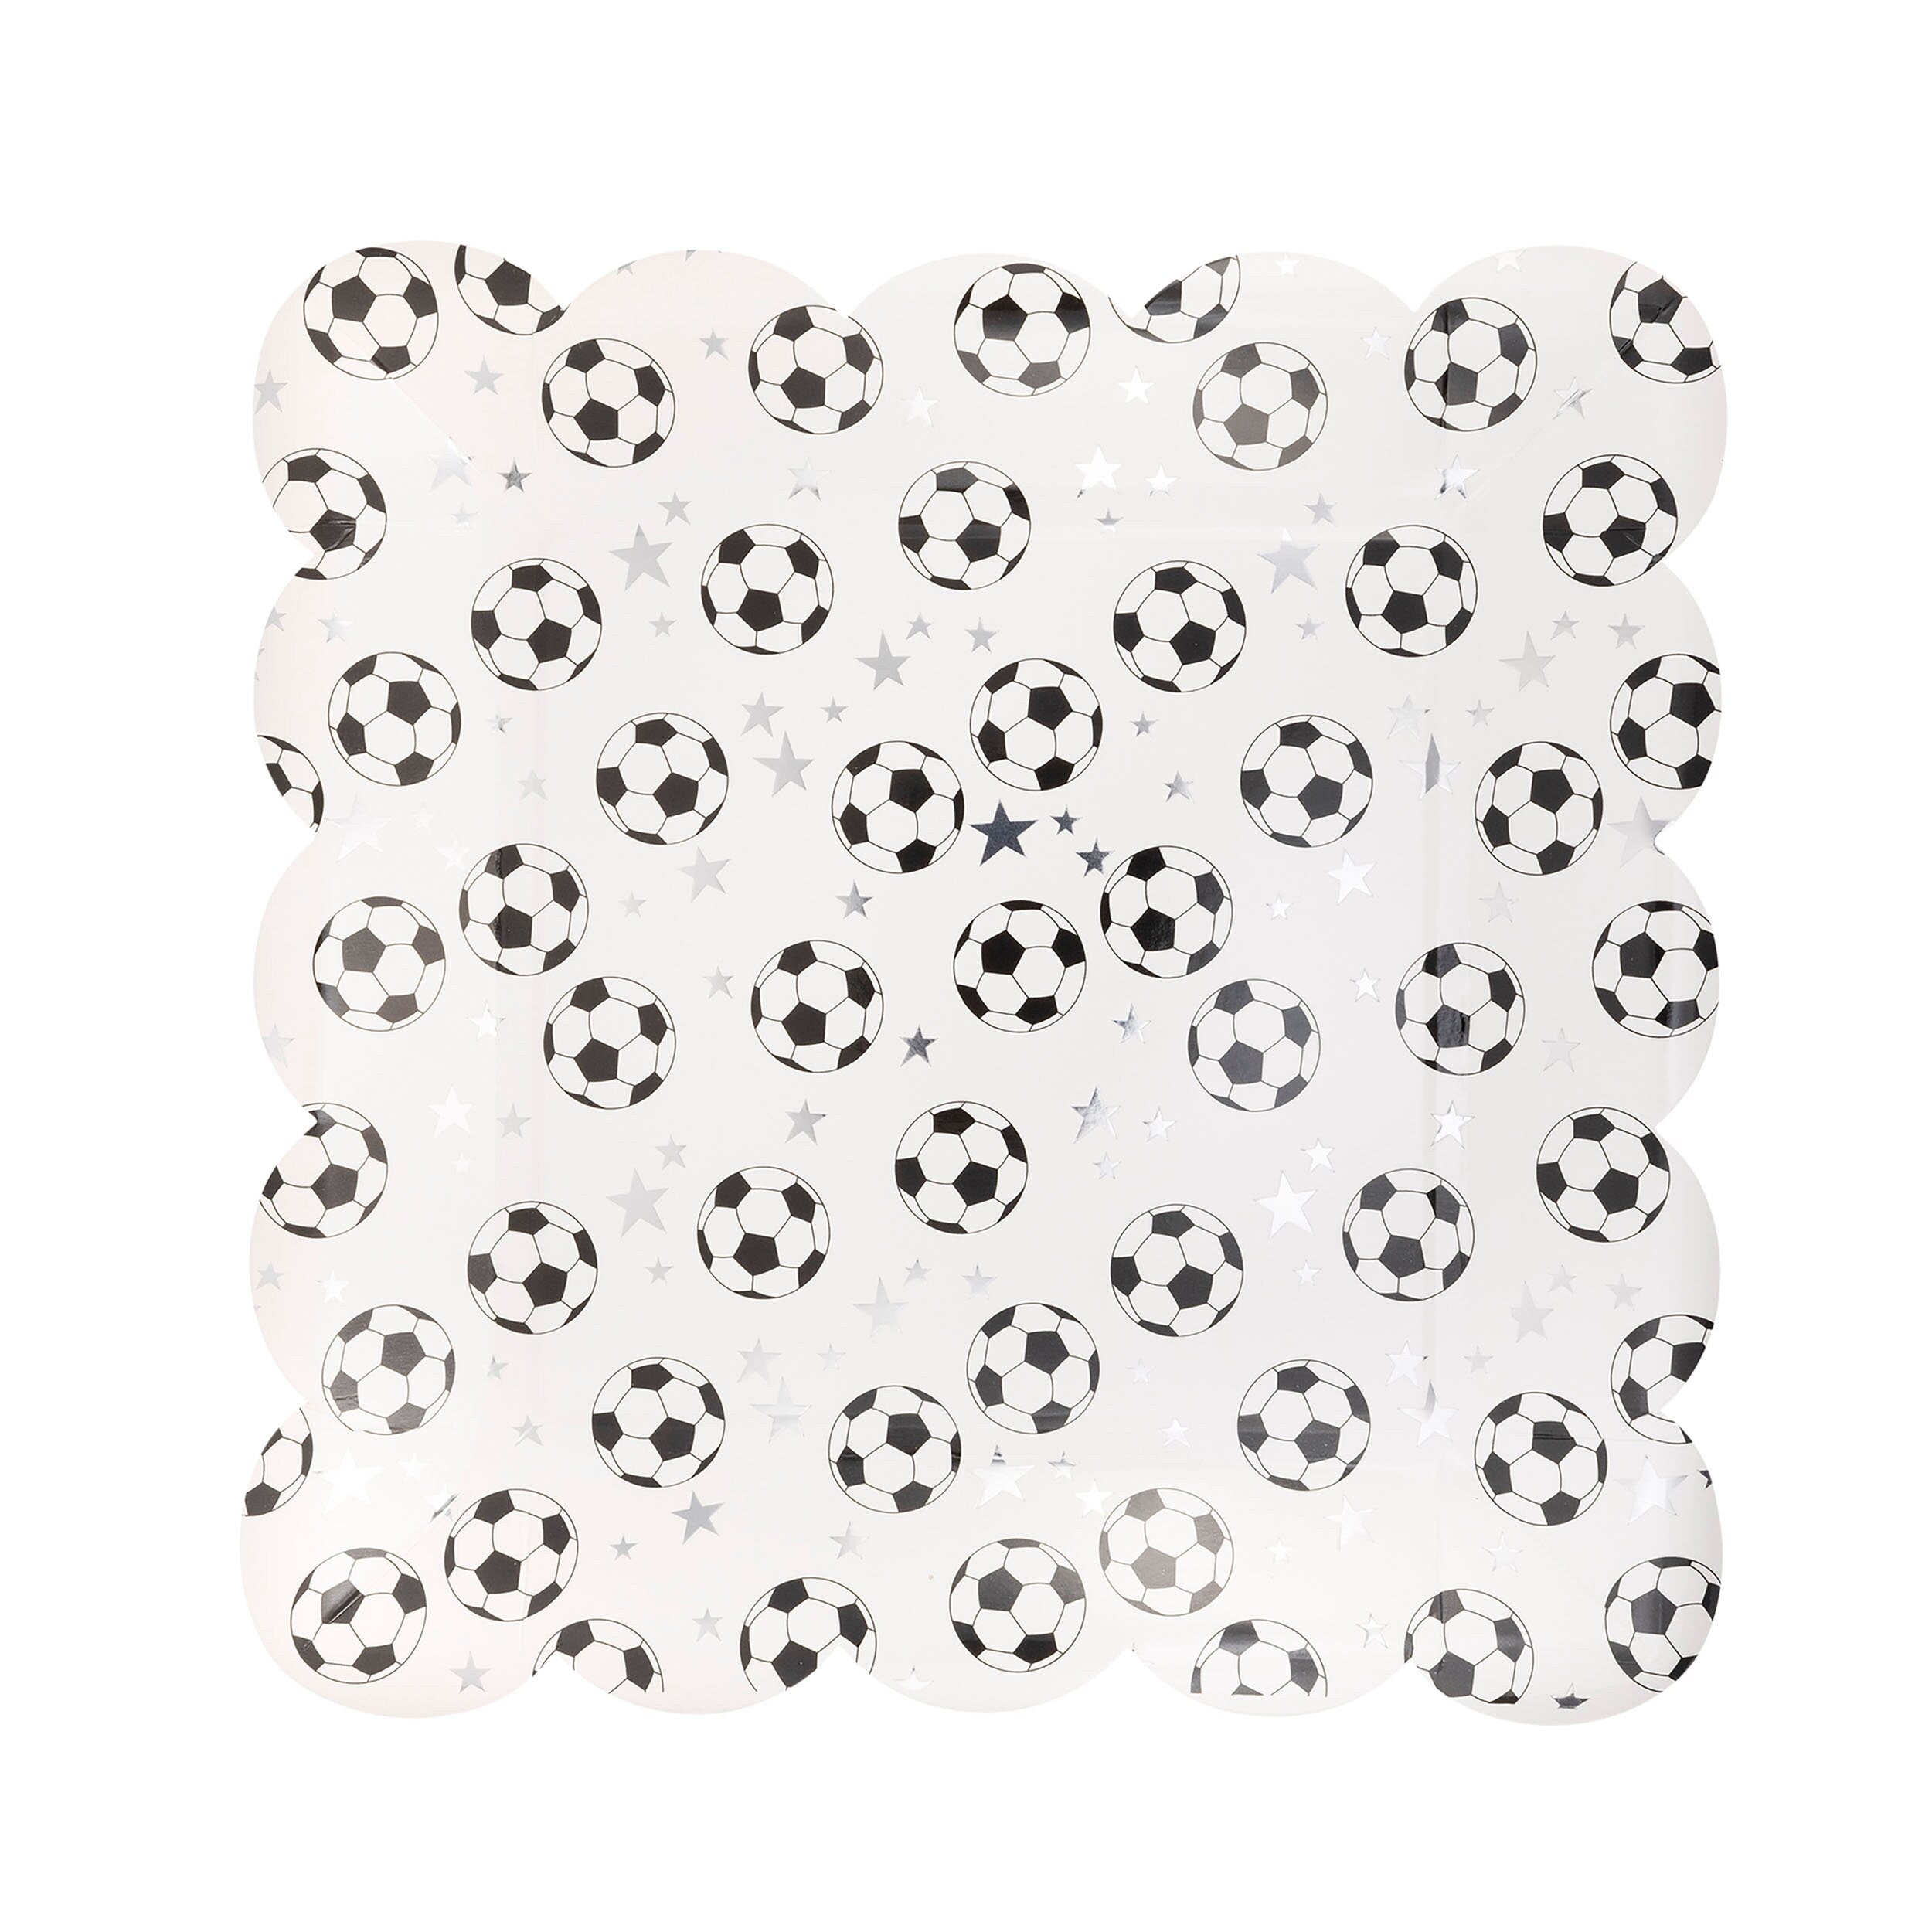 Soccer Party Plates - Scattered Soccer Balls with tiny silver stars, large square paper party plate with scalloped edges and white background